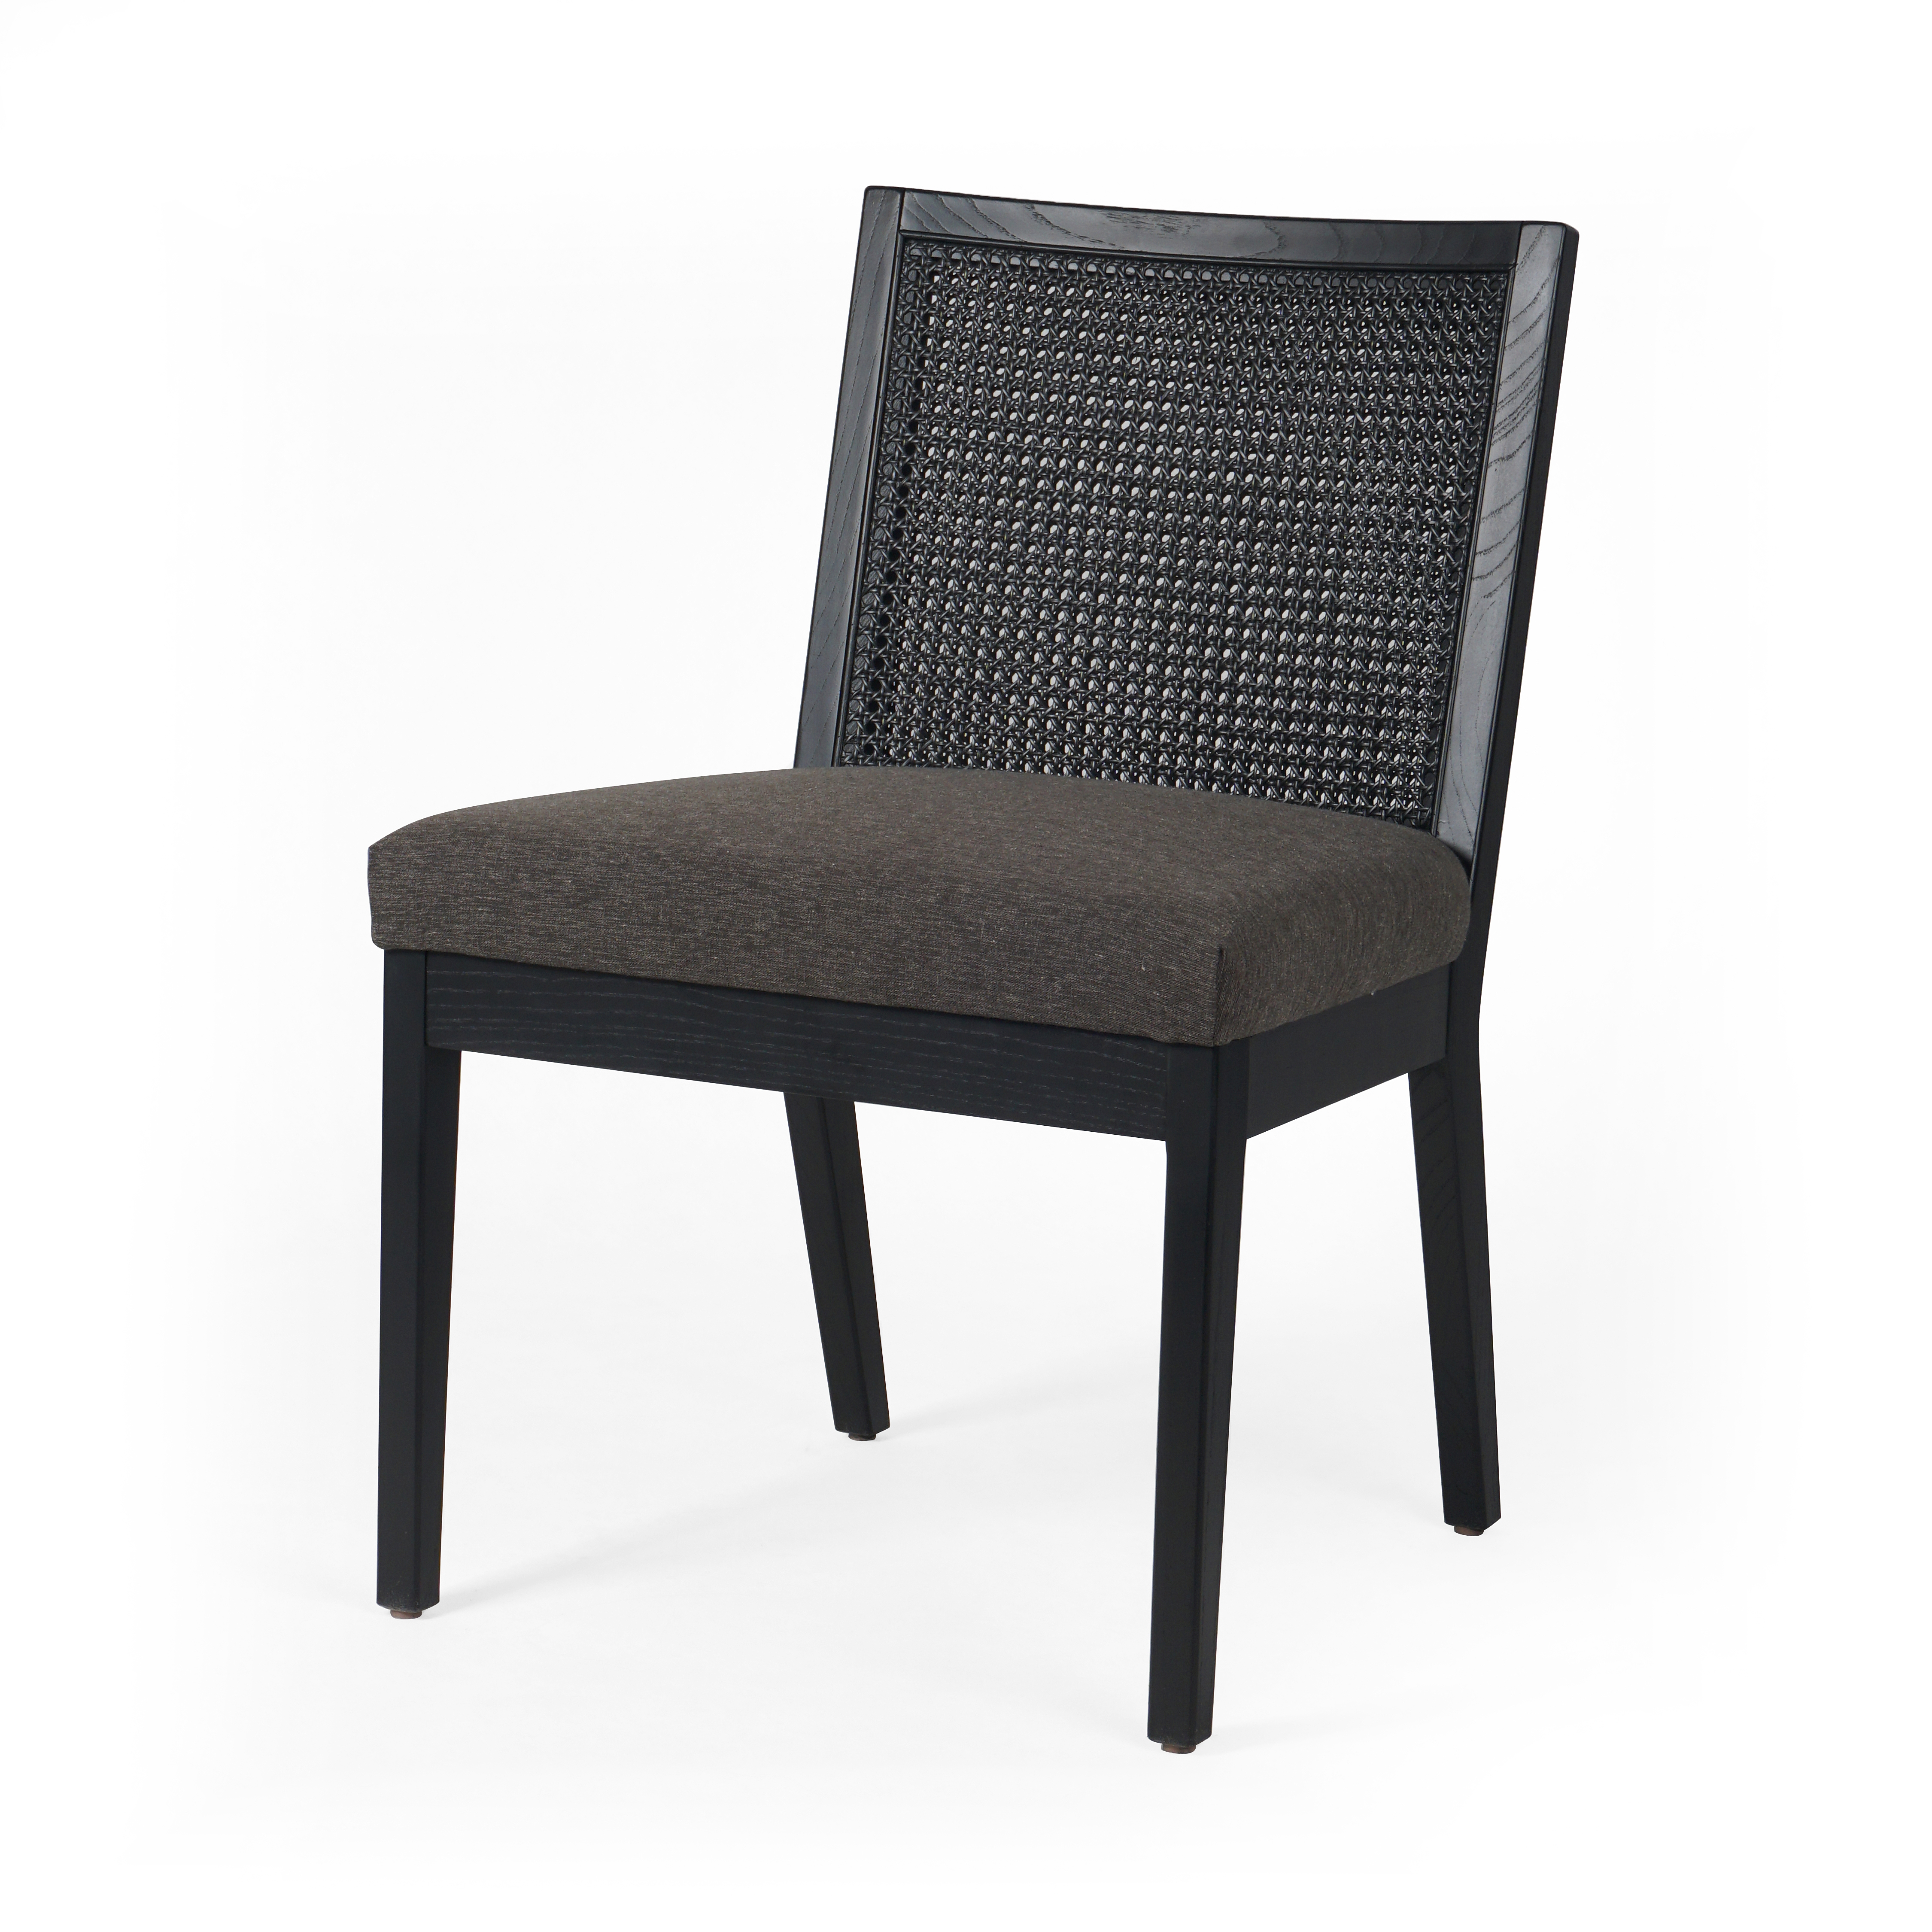 Antonia Armless Dining Chair-Charcl - Image 0